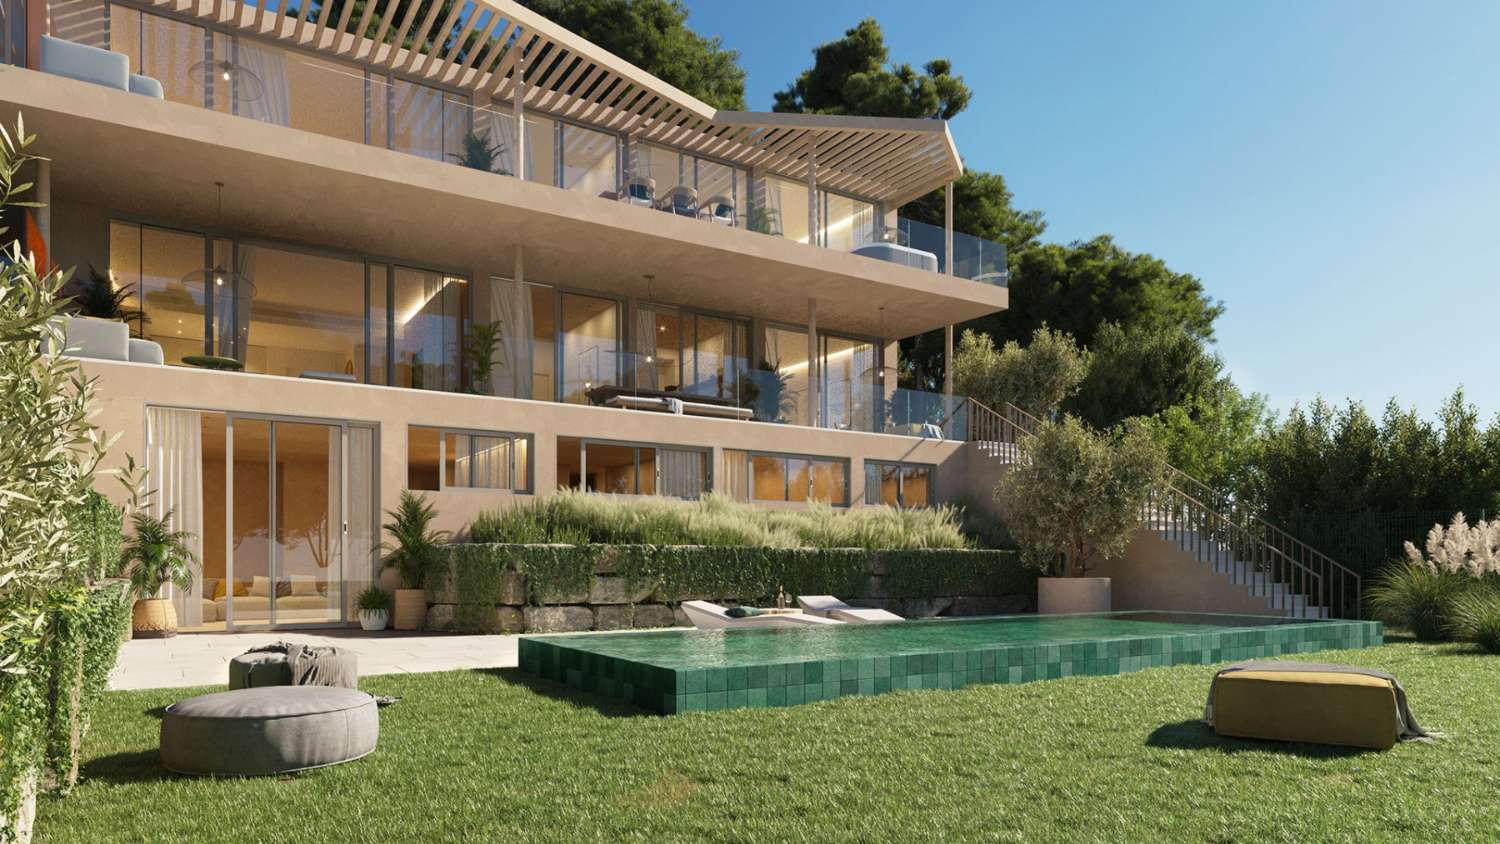 Exclusive apartments with a conceptual design in Mijas